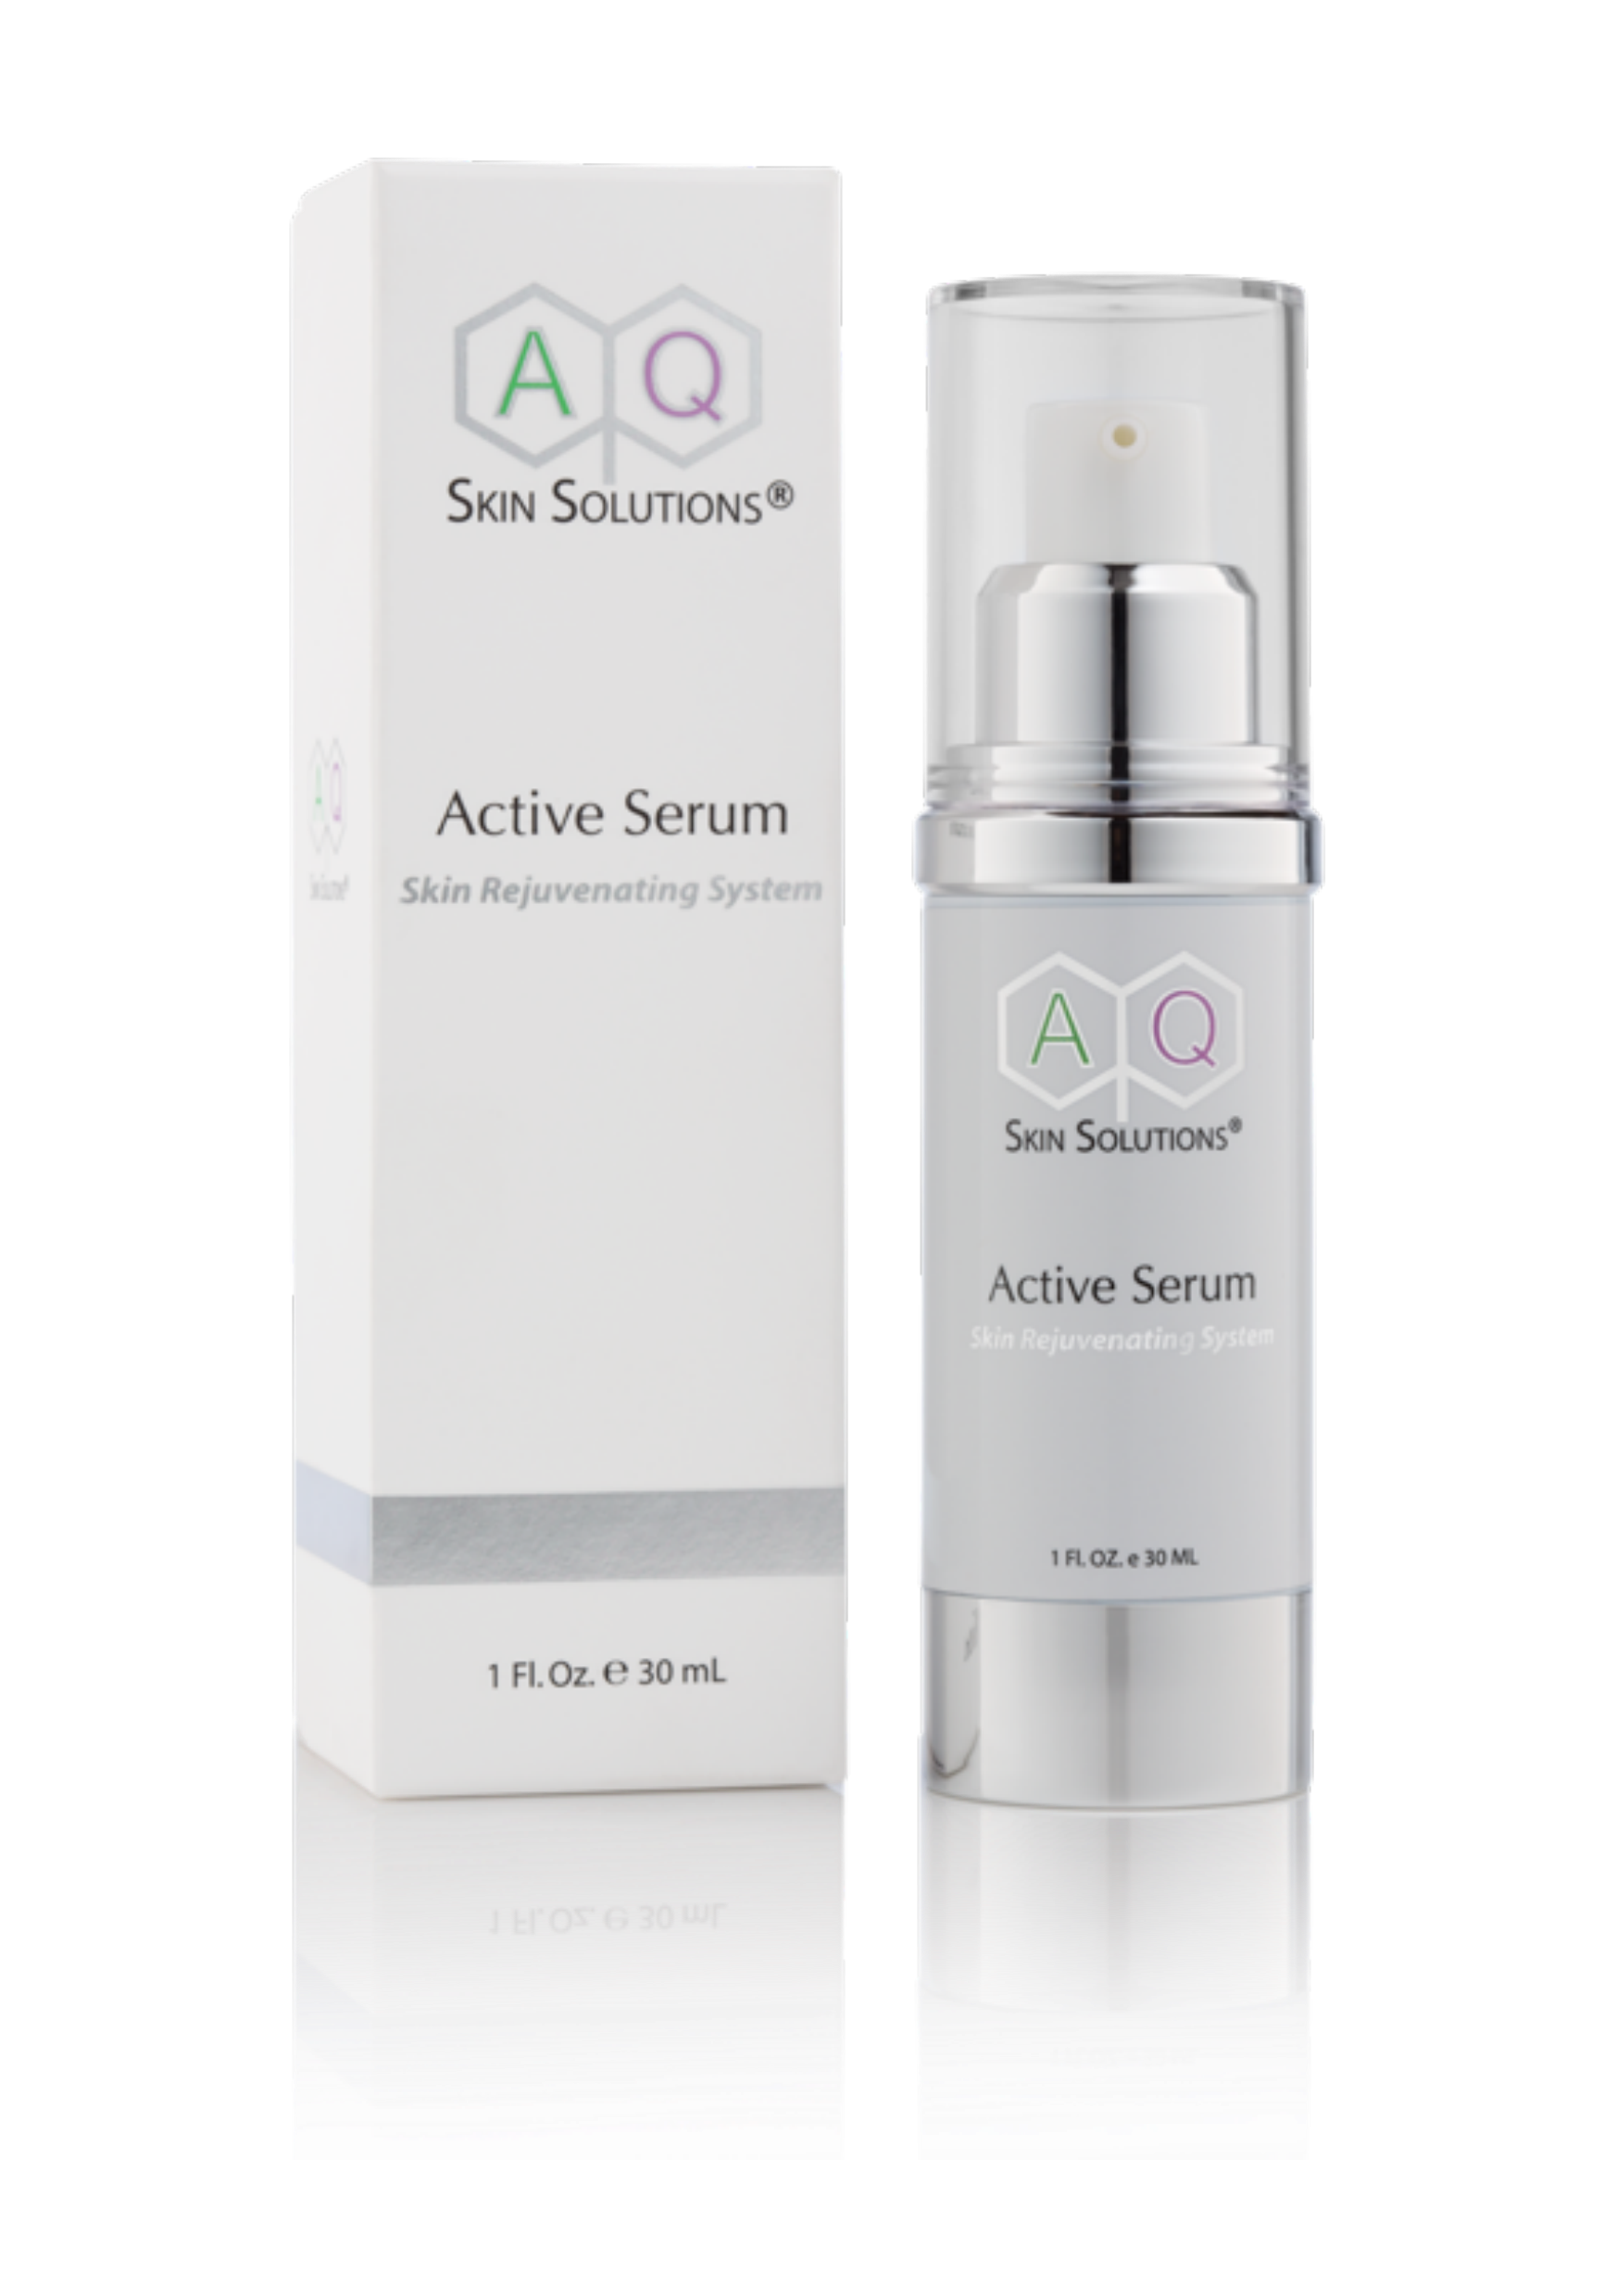 AQ Skin Solutions® Active Serum Daily